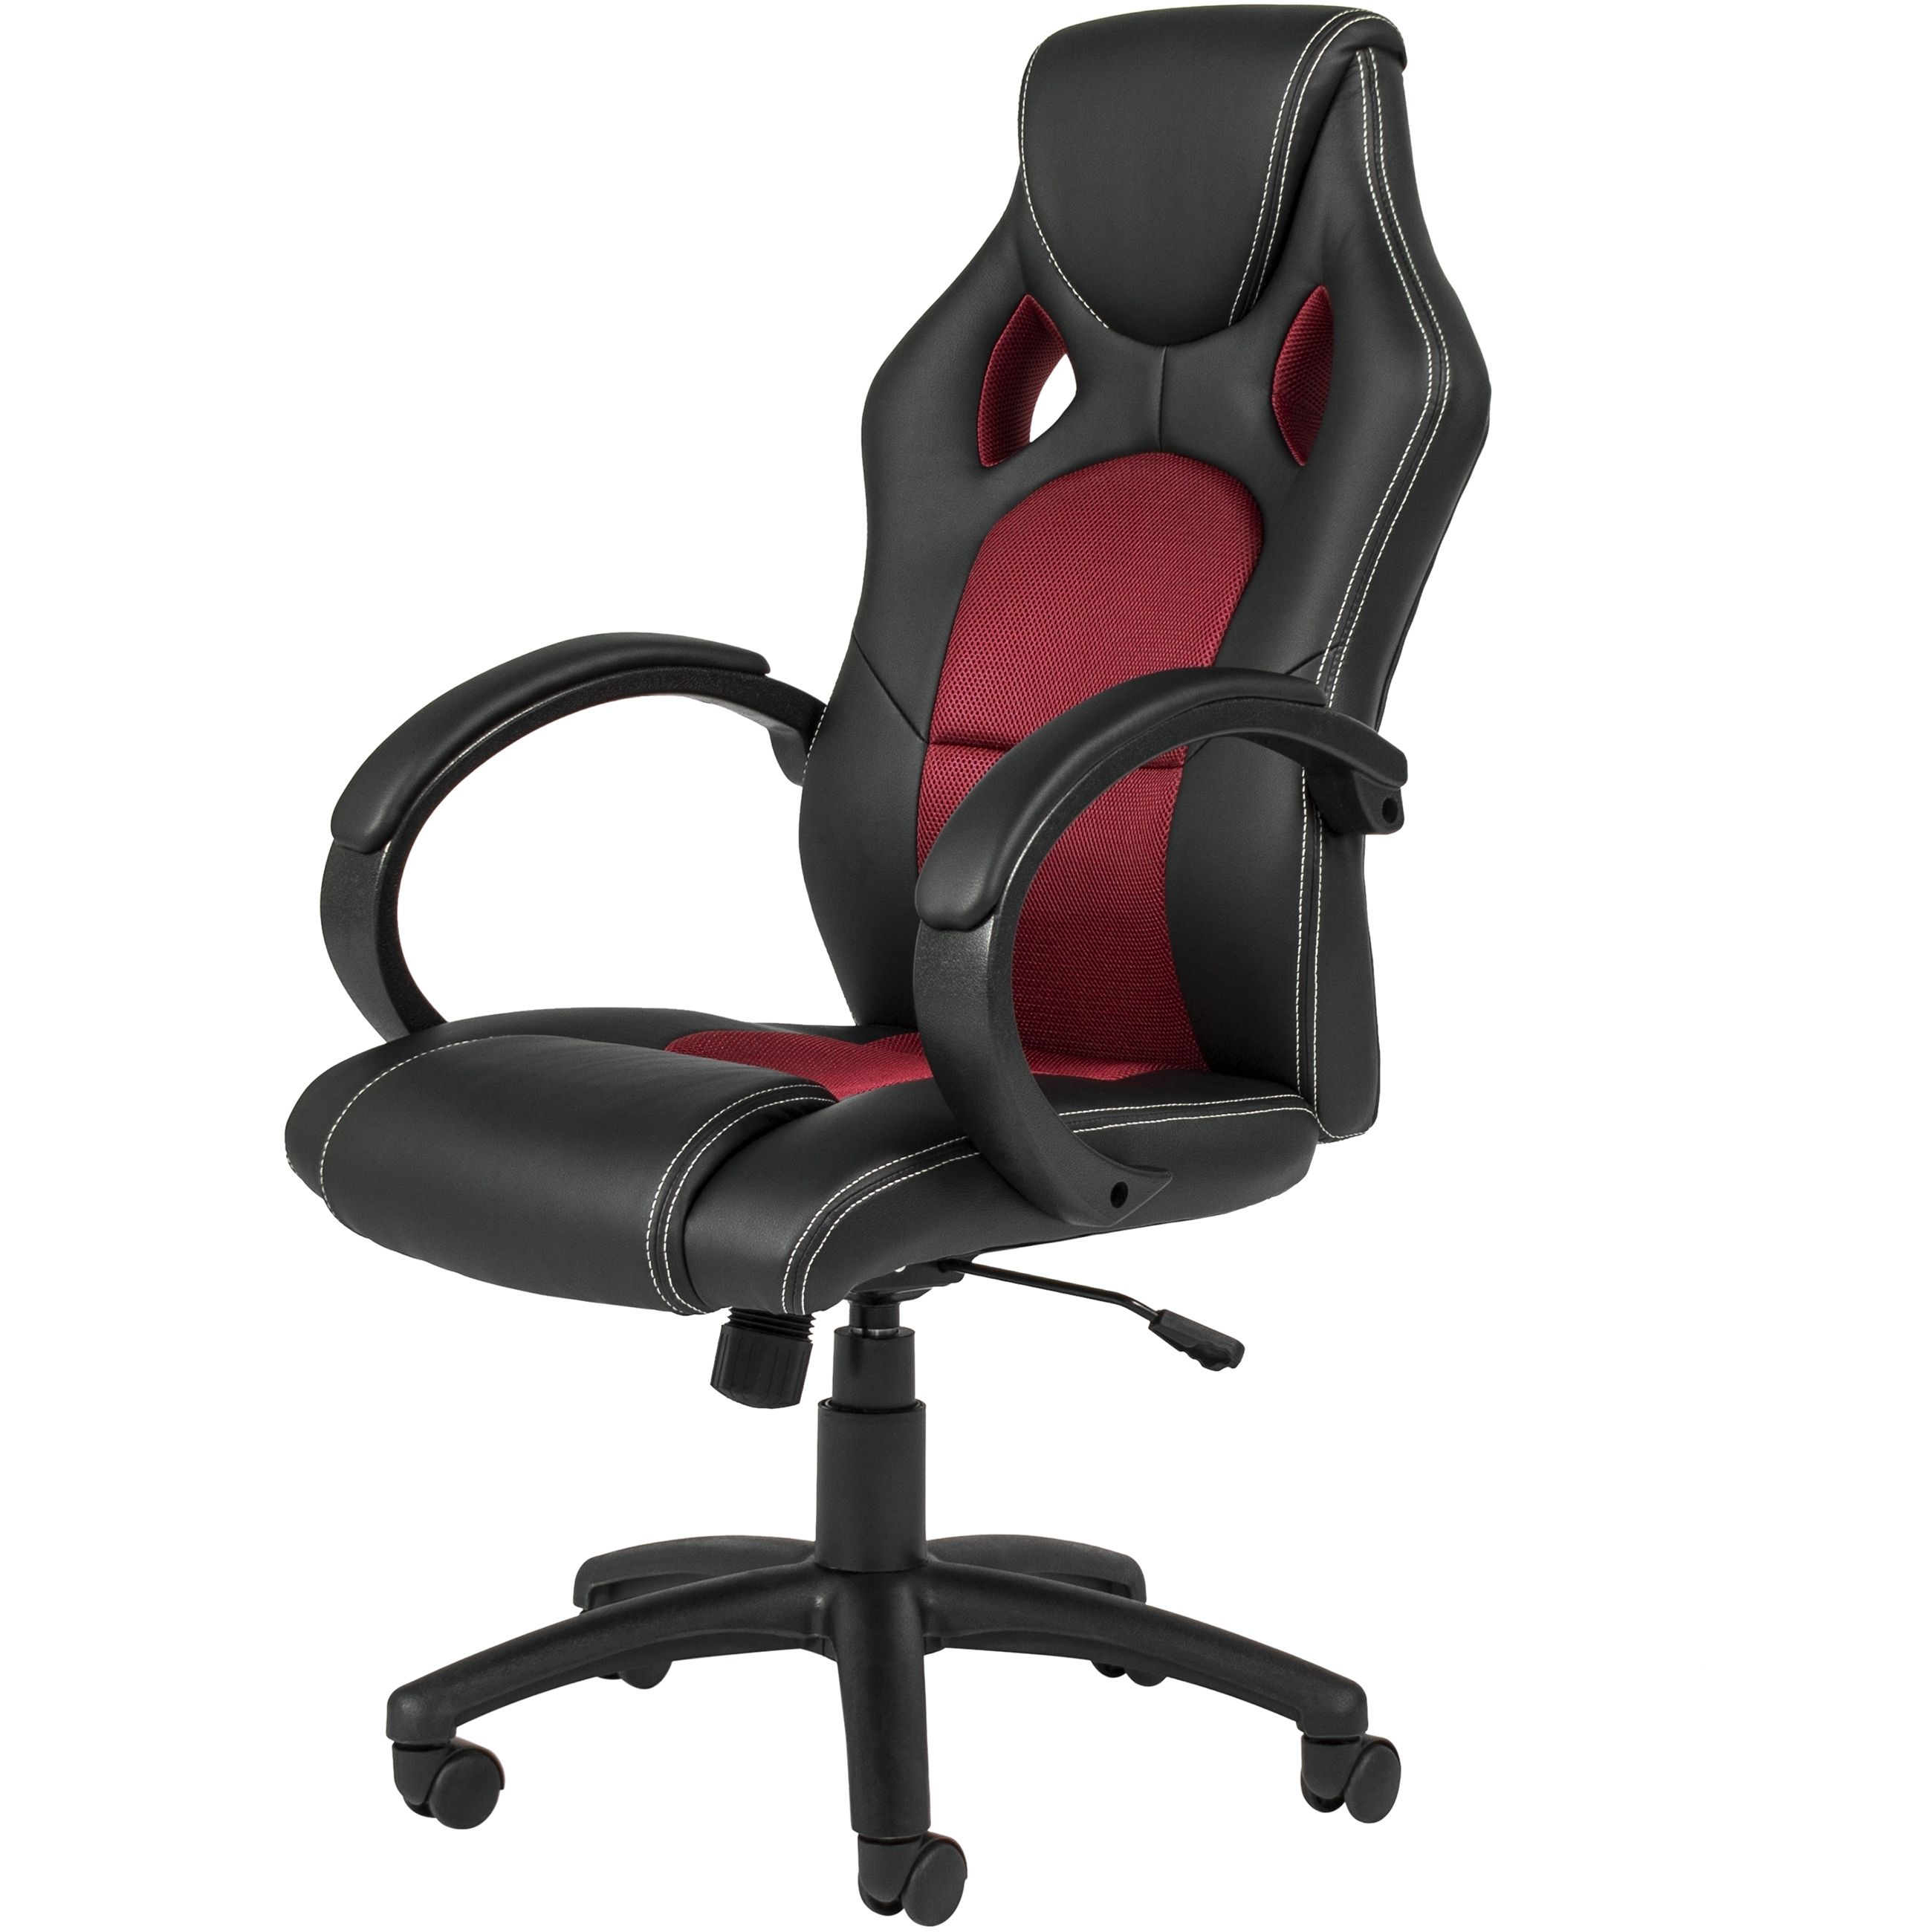 Latest Executive Racing Gaming Office Chair Pu Leather Swivel Computer With Regard To Computer Desks And Chairs (View 5 of 20)